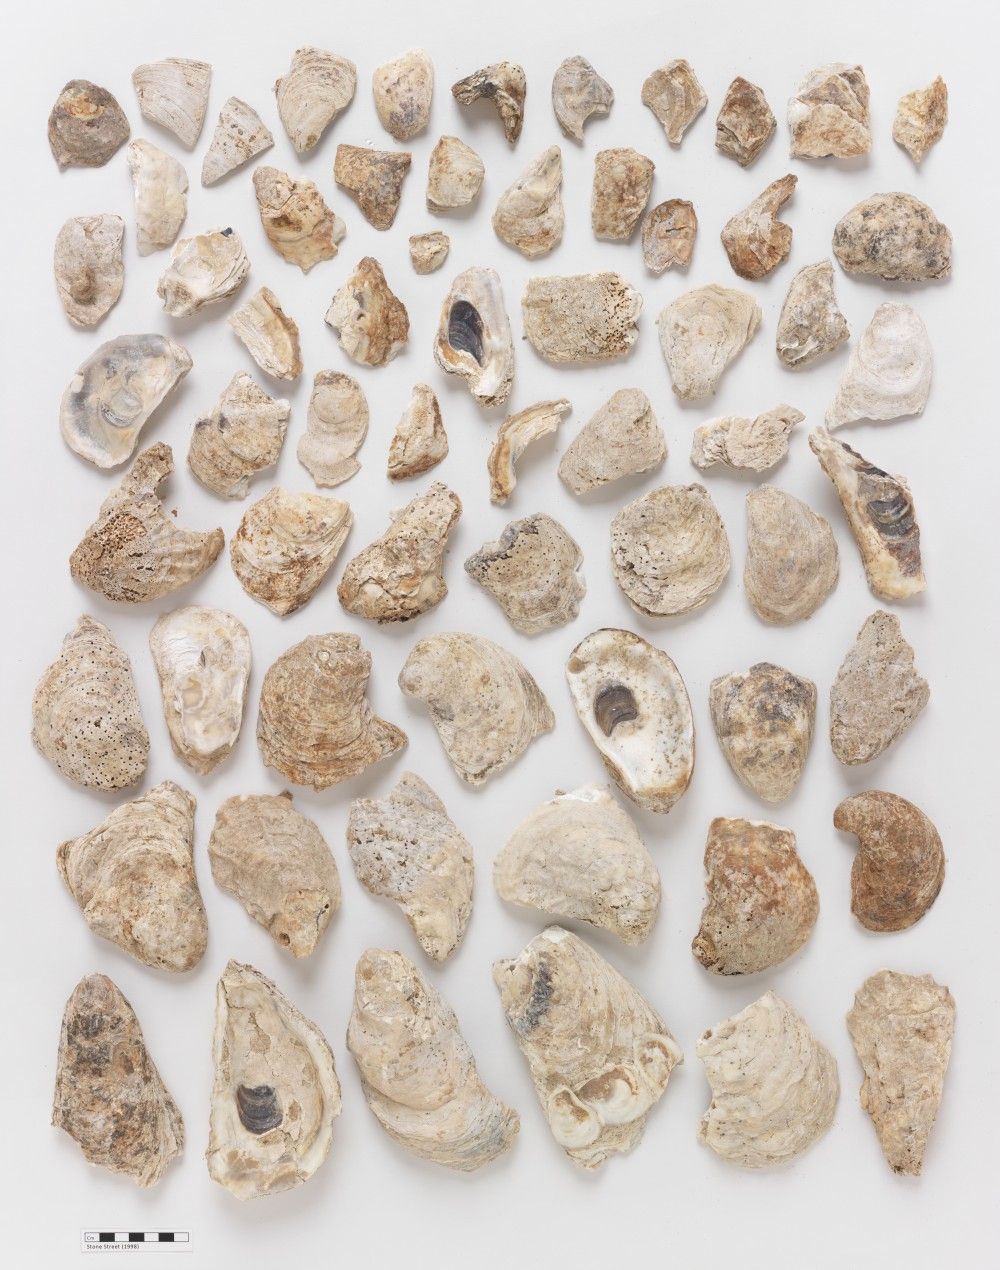 Dozens of oyster shells and pieces of various sizes laid out in an array next to a measuring strip.